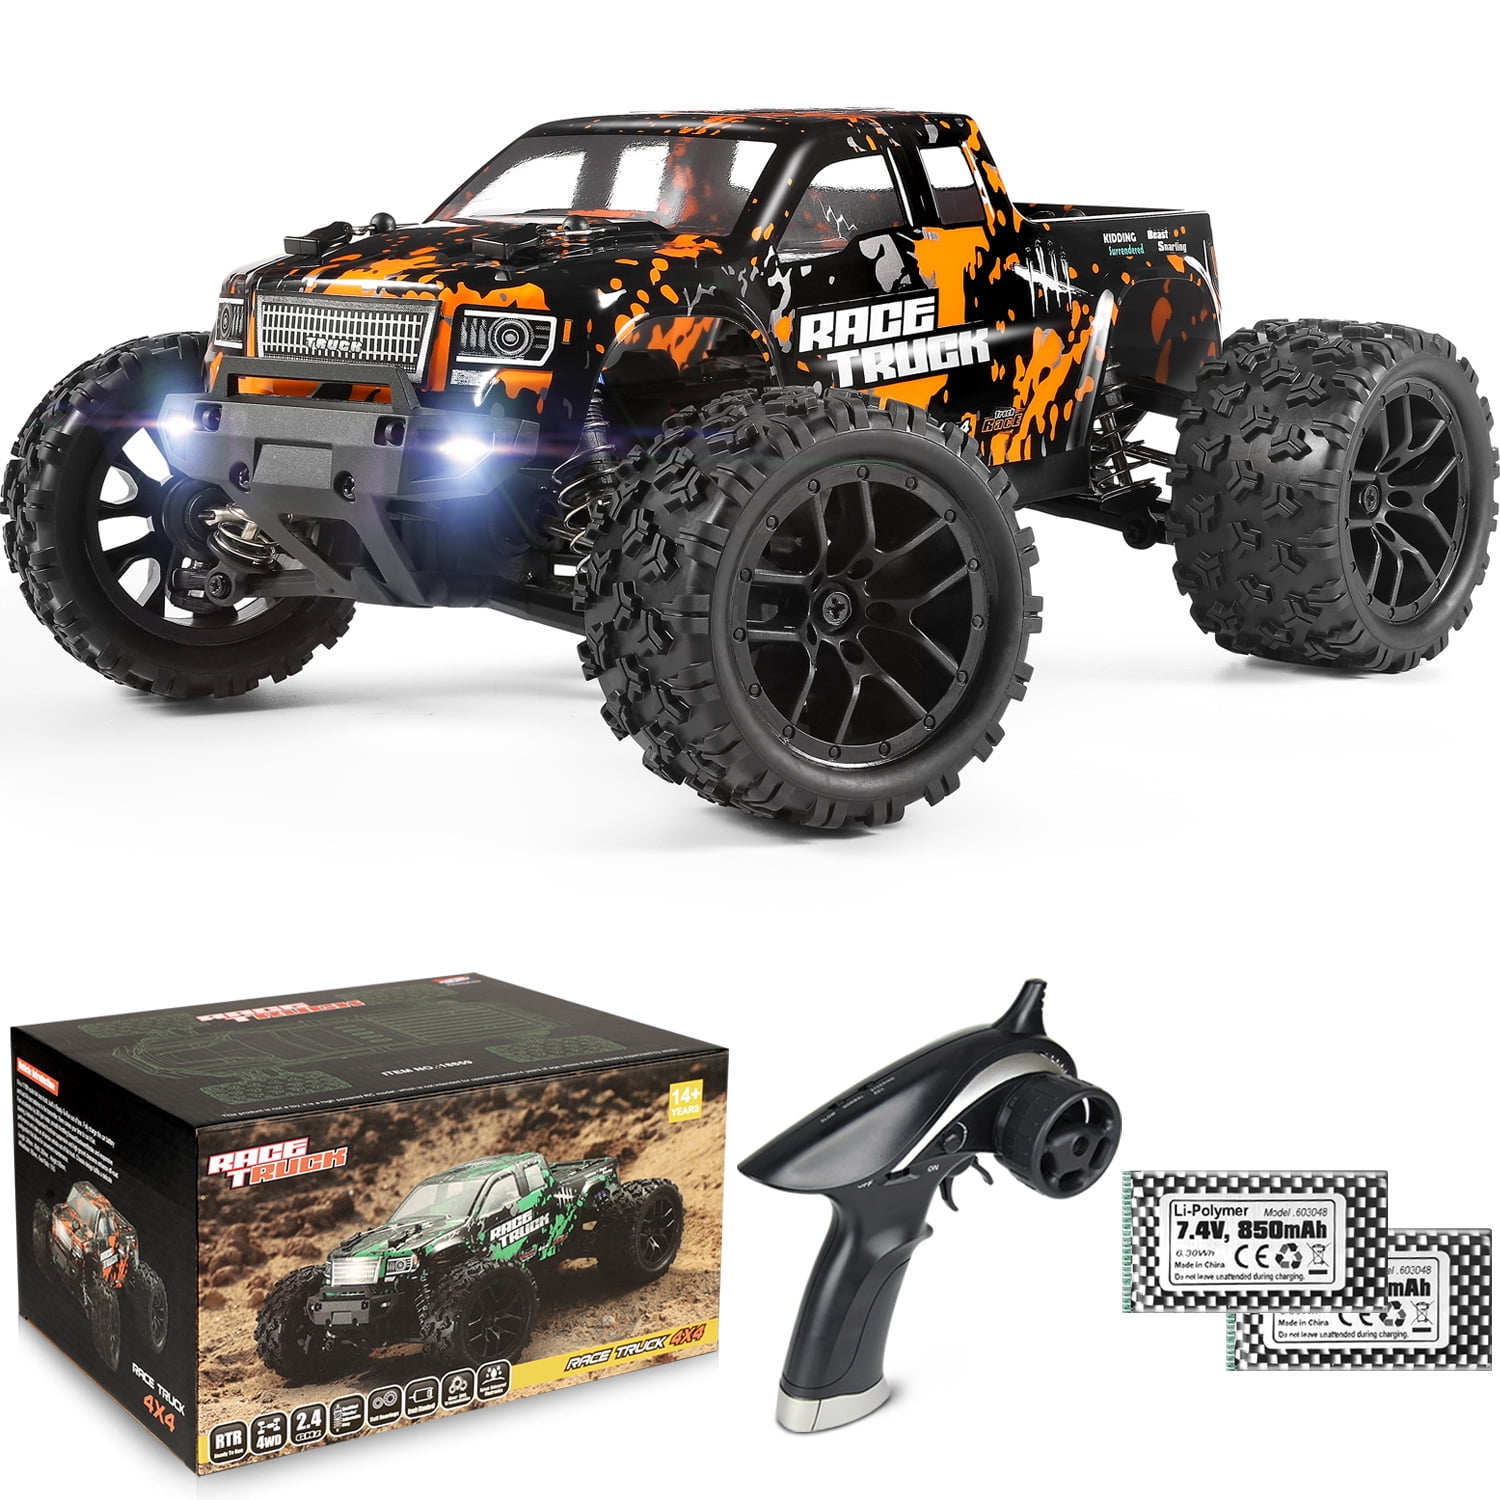 HAIBOXING 1:18 Scale RC Monster Truck - High Speed UK